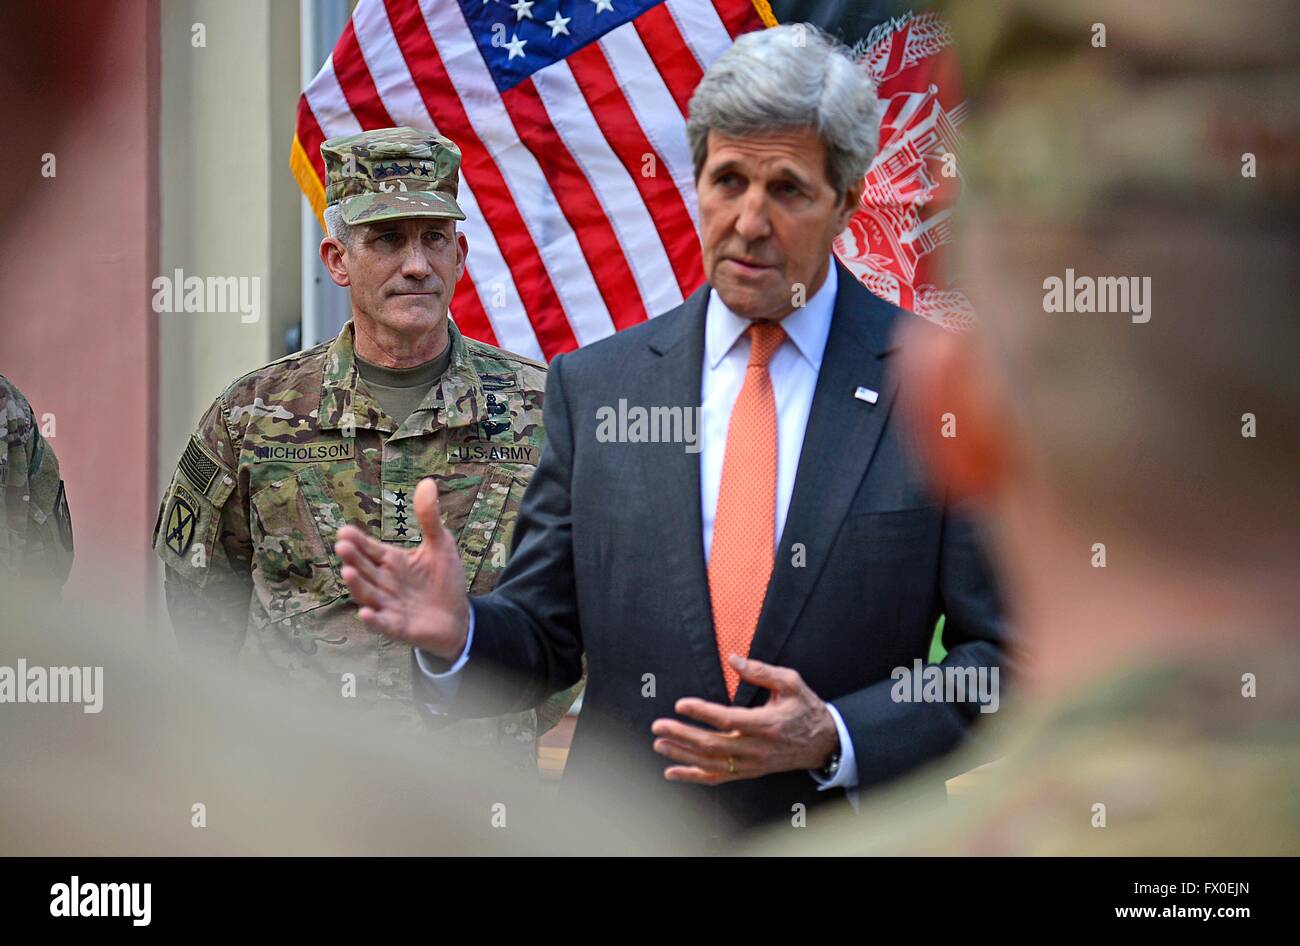 Kabul, Afghanistan. 9th April, 2016. U.S Secretary of State John Kerry alongside Gen. John Nicholson, Commander of the U.S. Forces, talks with service members at Camp Resolute Support April 9, 2016 in Kabul, Afghanistan. Kerry made a surprise visit to Kabul to meet with government leaders and U.S. Armed Forces commanders. Credit:  Planetpix/Alamy Live News Stock Photo